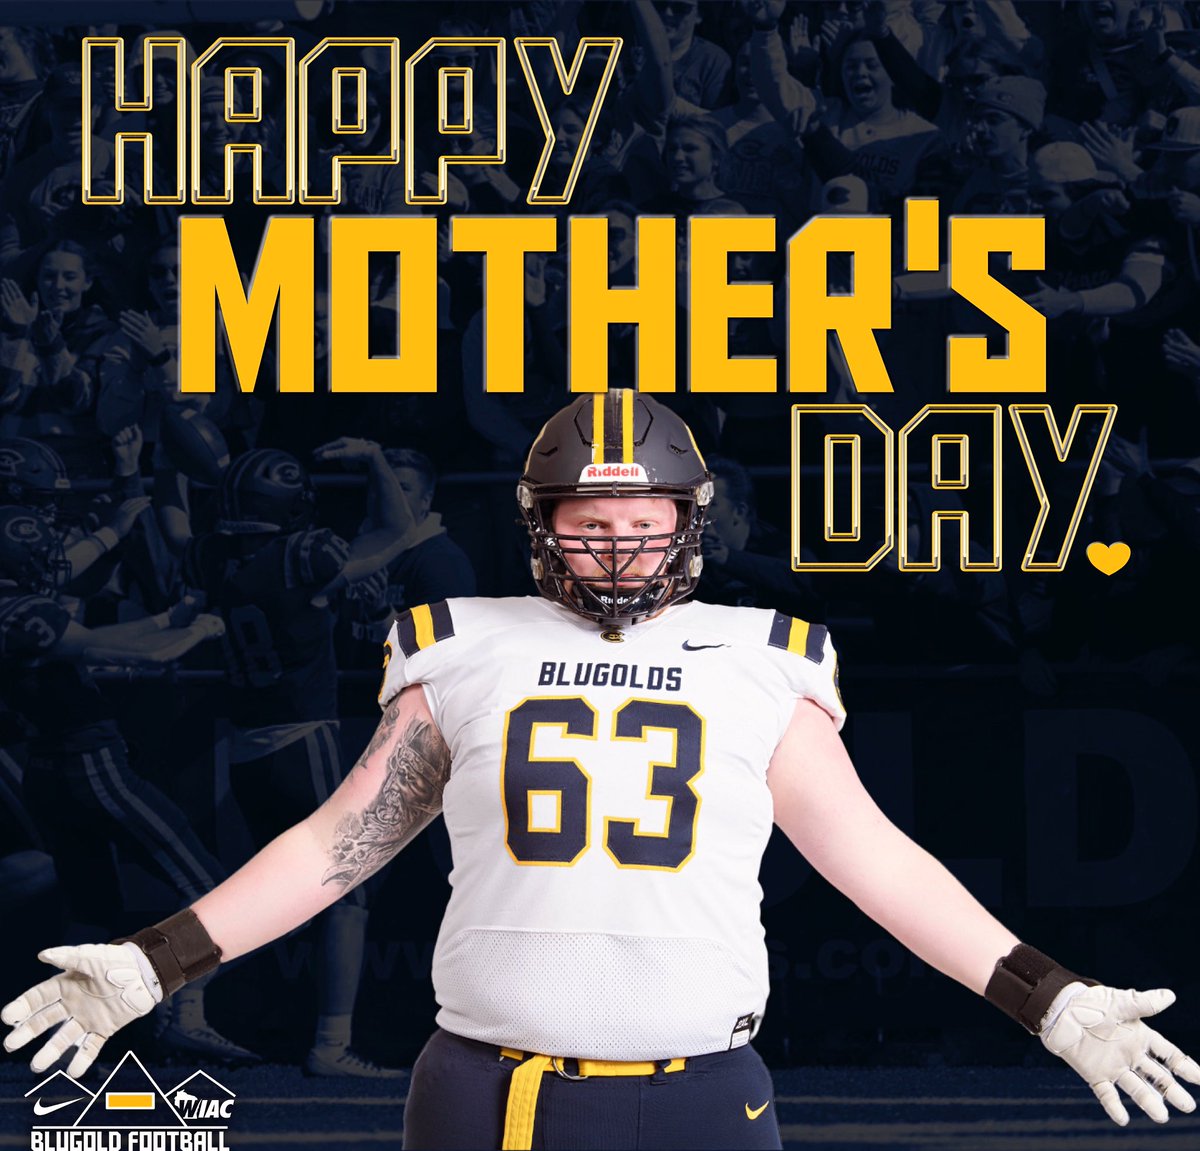 Happy Mother’s Day to all our Blugold Mothers out there! BIG bear hugs to all of you!!! #ROLLGOLDS x #CTM25